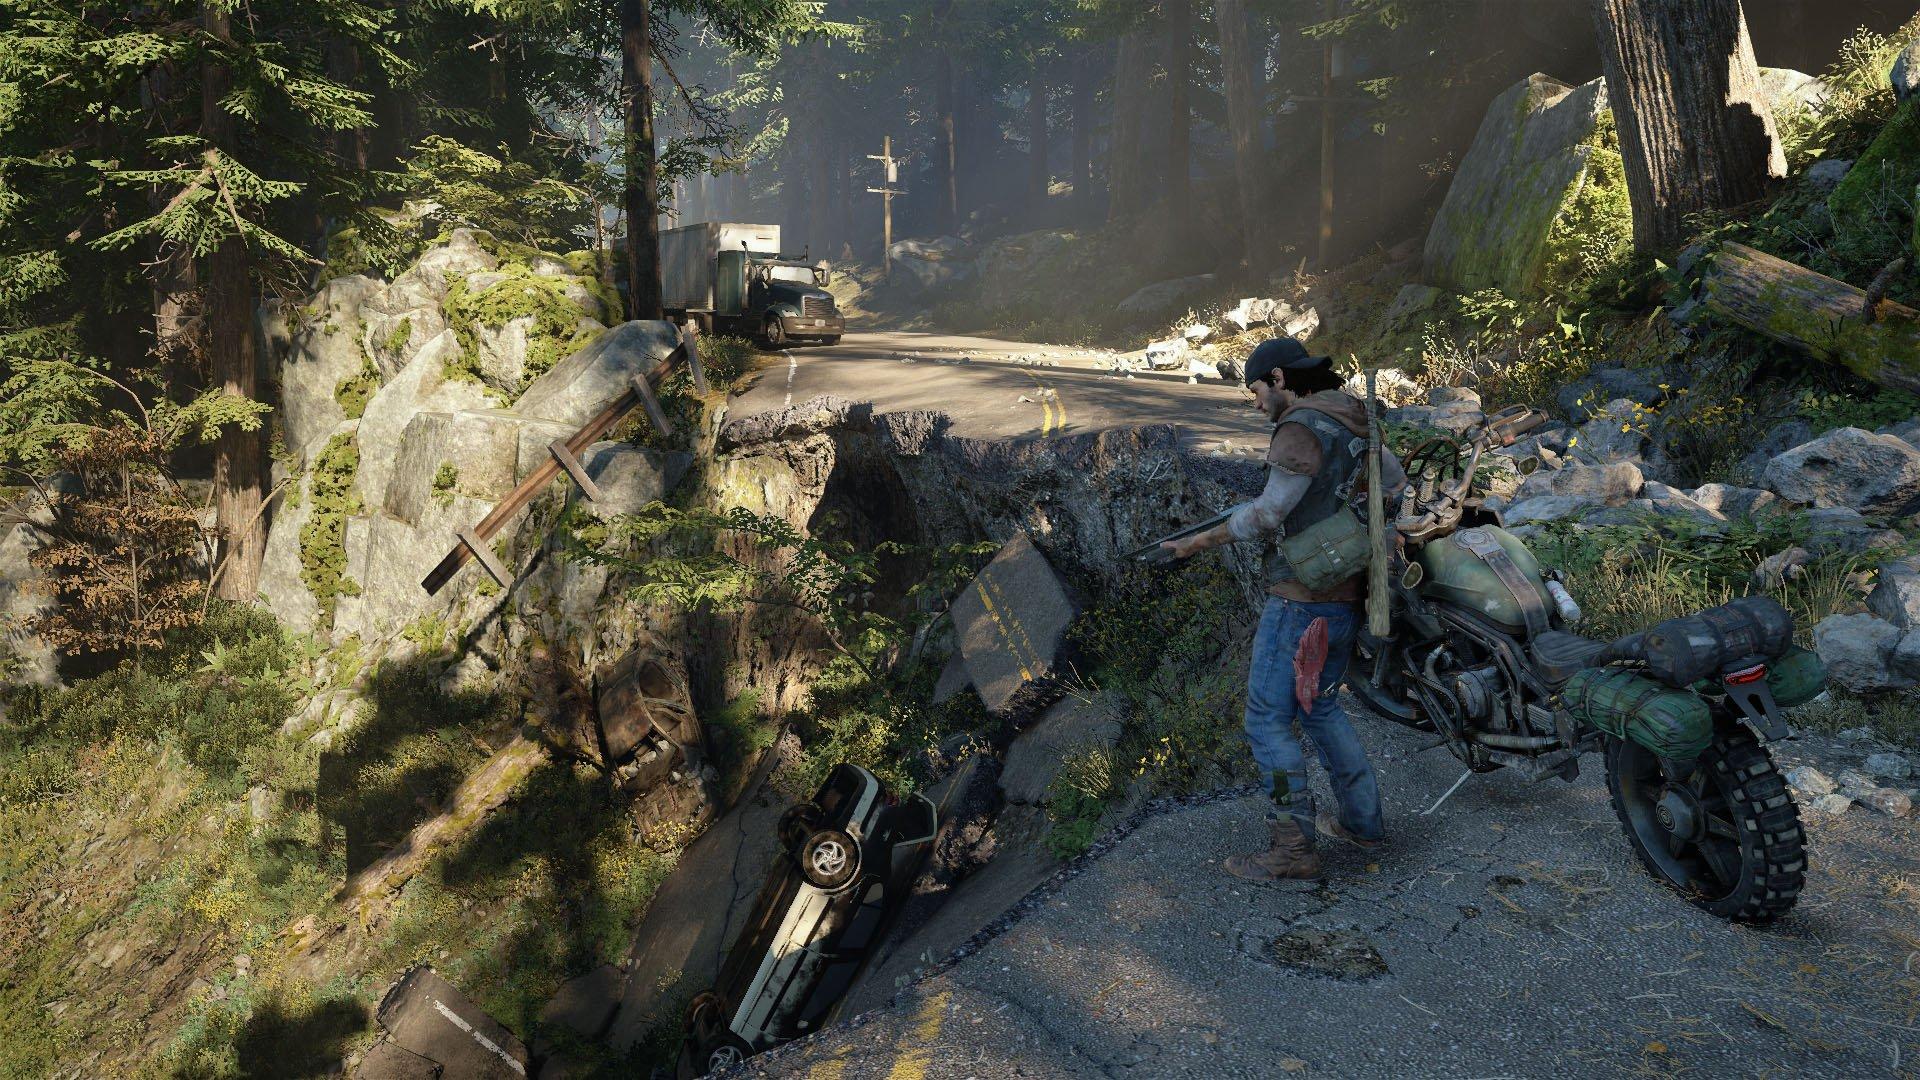 days gone collector's edition price